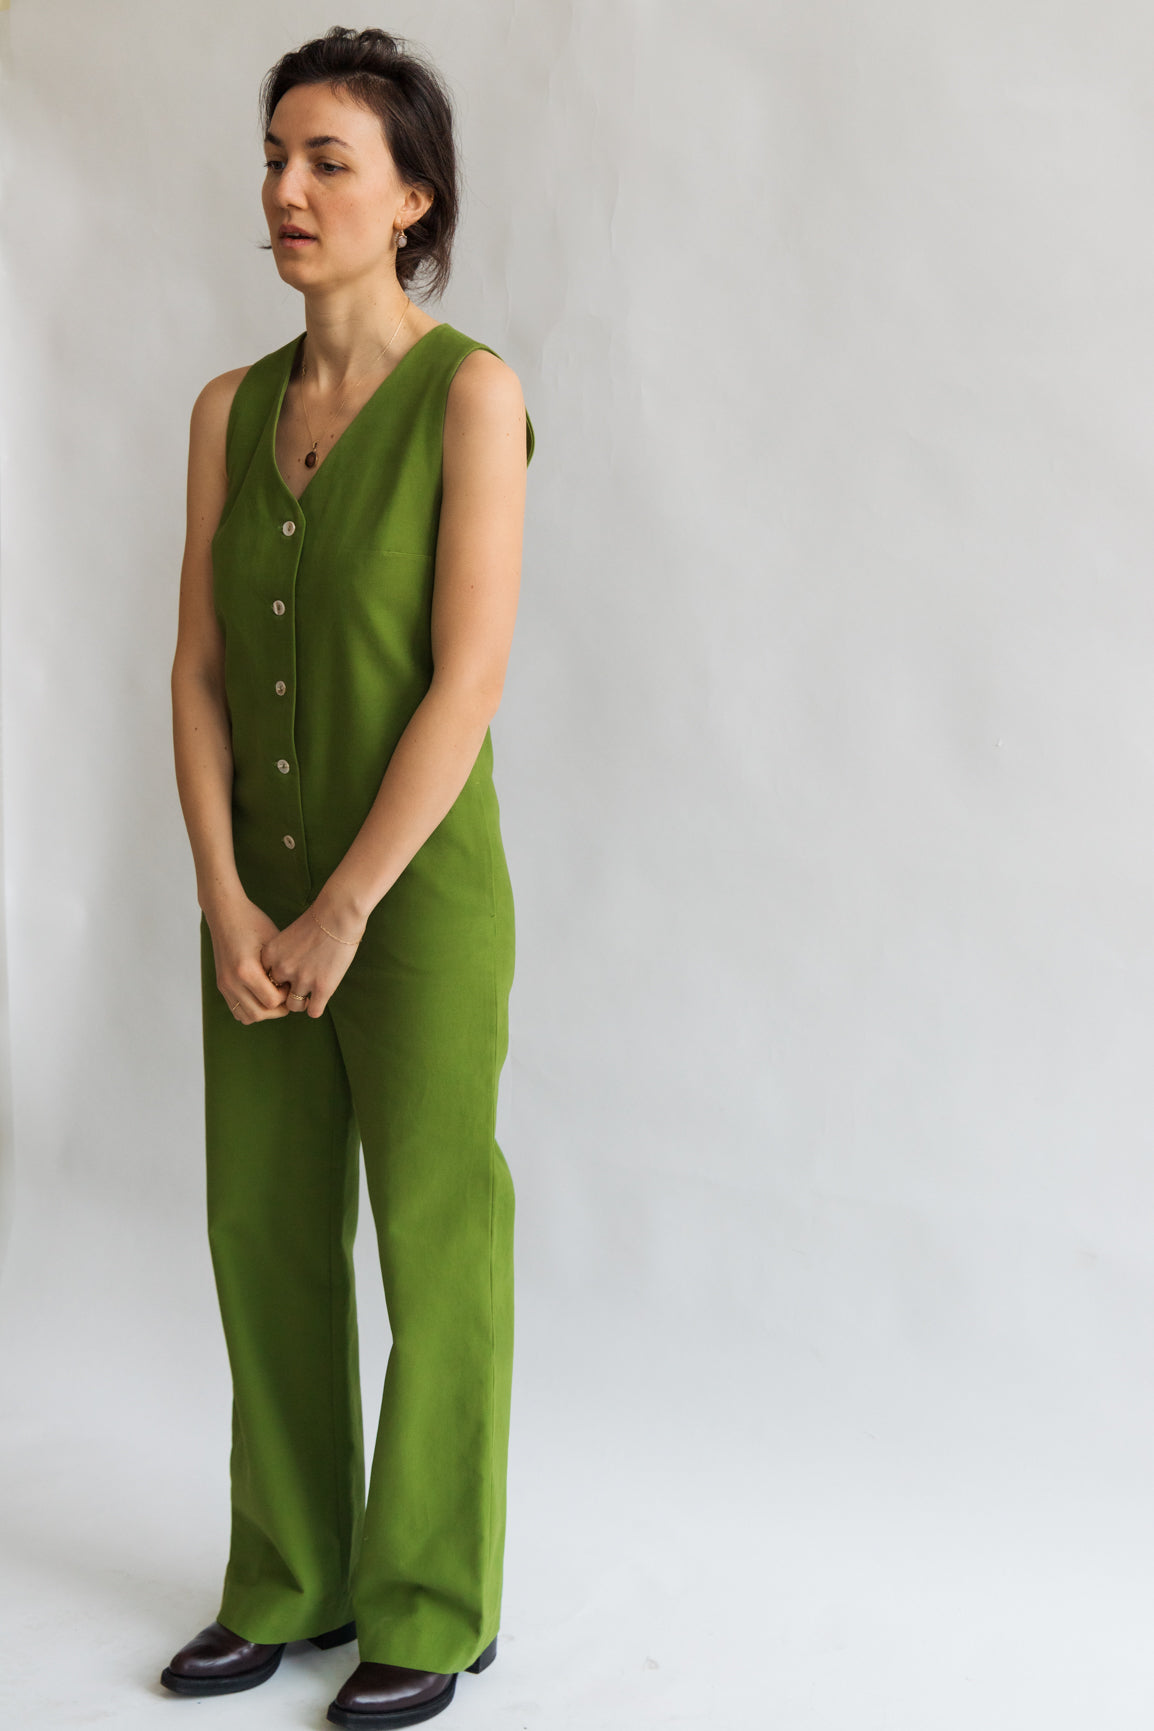 Green color Jumpsuit workwear cotton canvas with pockets 5 buttons v-neck tall girls short girls